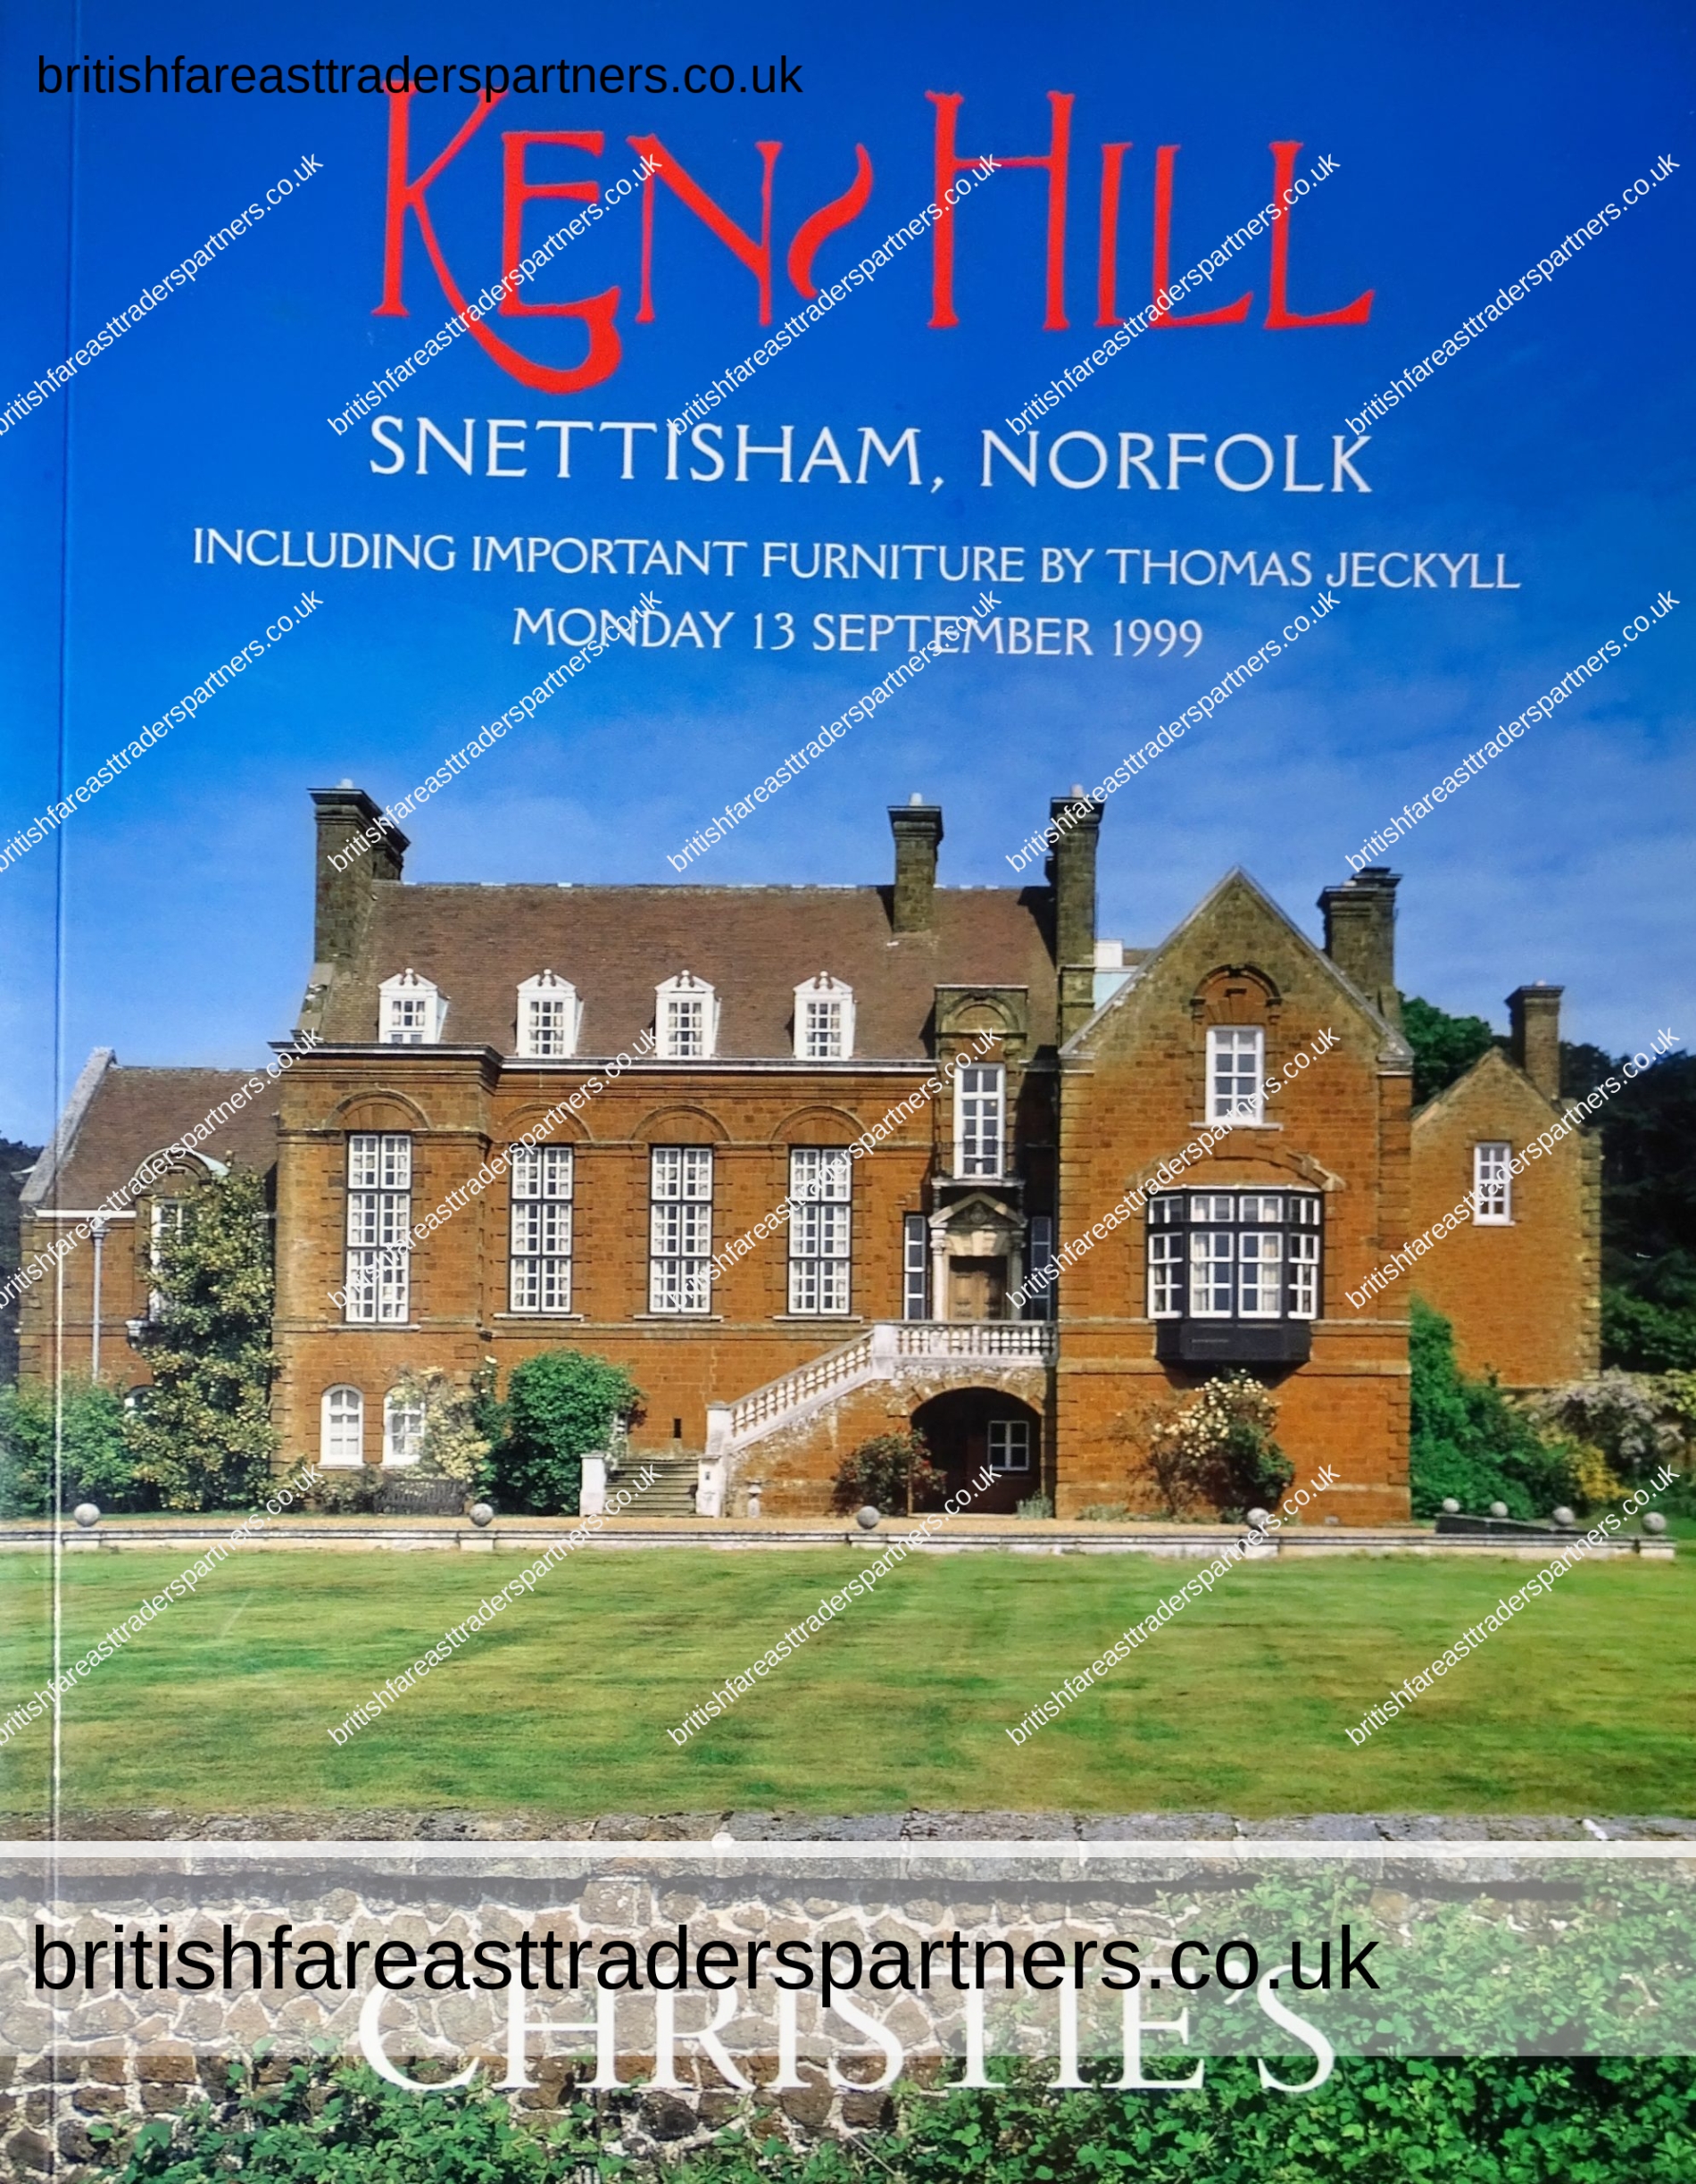 CHRISTIE’S SOUTH KENSINGTON LONDON 13 SEPTEMBER 1999 KEN HILL SNETTISHAM, NORFOLK INCLUDING IMPORTANT FURNITURE  BY THOMAS JECKYLL SOLD BY ORDER OF THE EXECUTORS OF THE LATE SIR EDWARD STEPHEN LYCETT GREEN, Bt. AUCTION Catalogue COLLECTABLES | ALTERNATIVE INVESTMENTS | LIFESTYLE